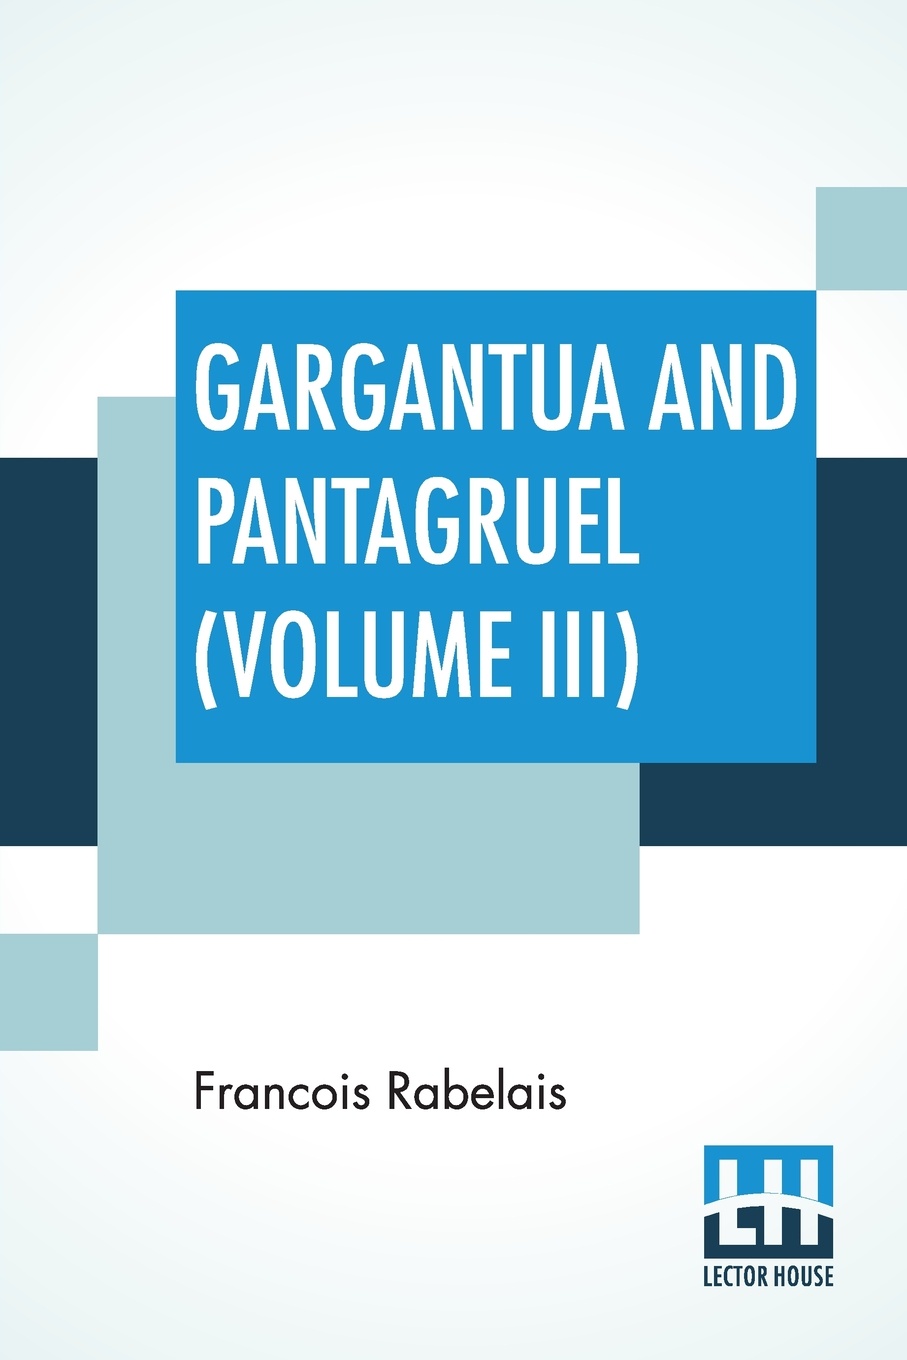 Gargantua And Pantagruel (Volume III). Five Books Of The Lives, Heroic Deeds And Sayings Of Gargantua And His Son Pantagruel, Translated Into English By Sir Thomas Urquhart Of Cromarty And Peter Antony Motteux